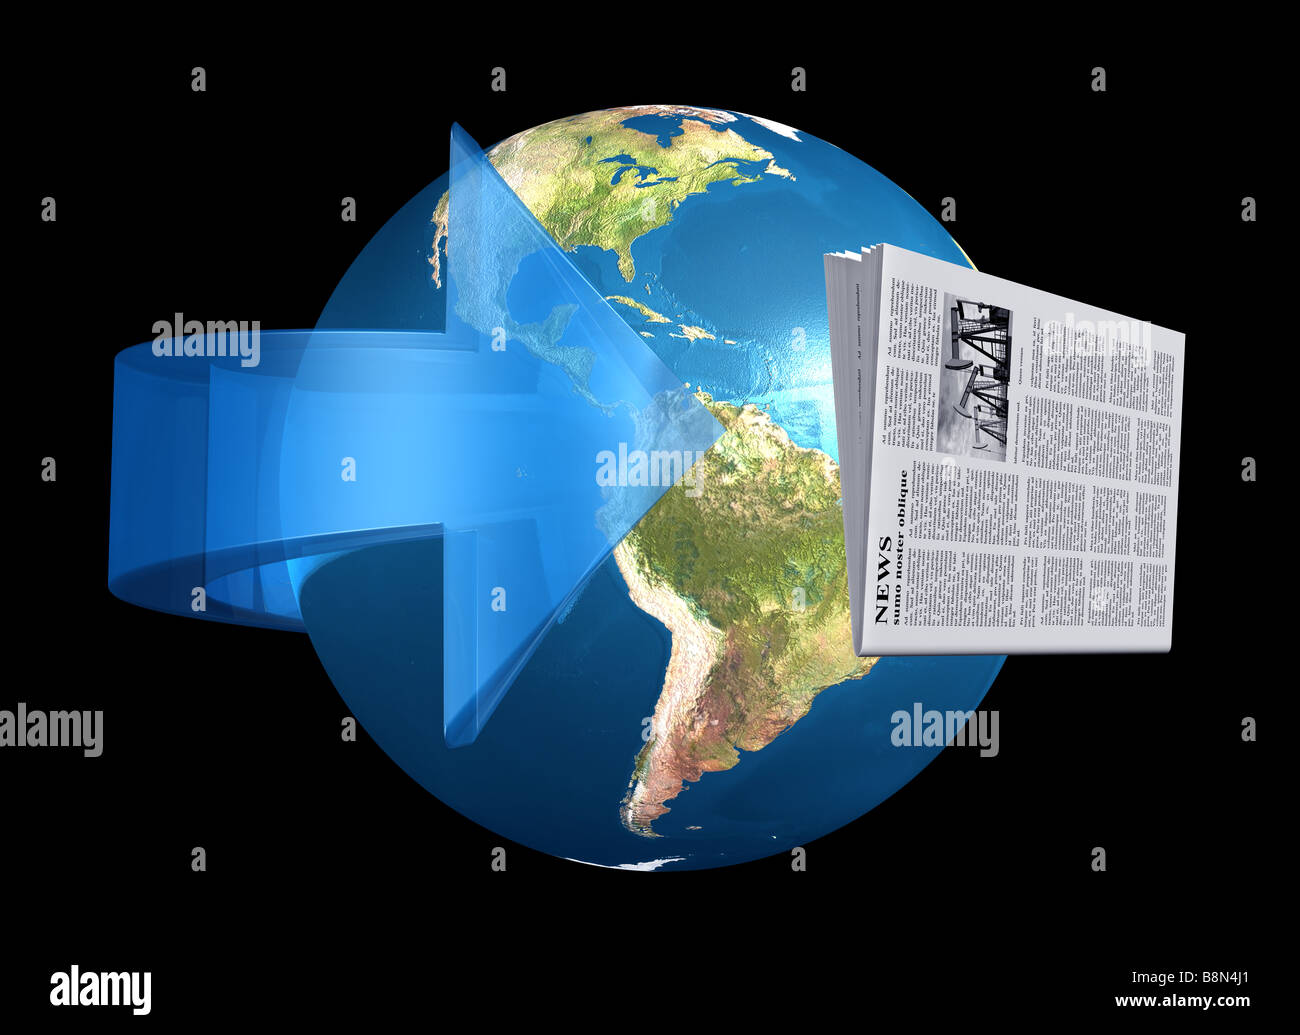 Illustration of a newspaper flying around the world illustrating news from around the world Stock Photo